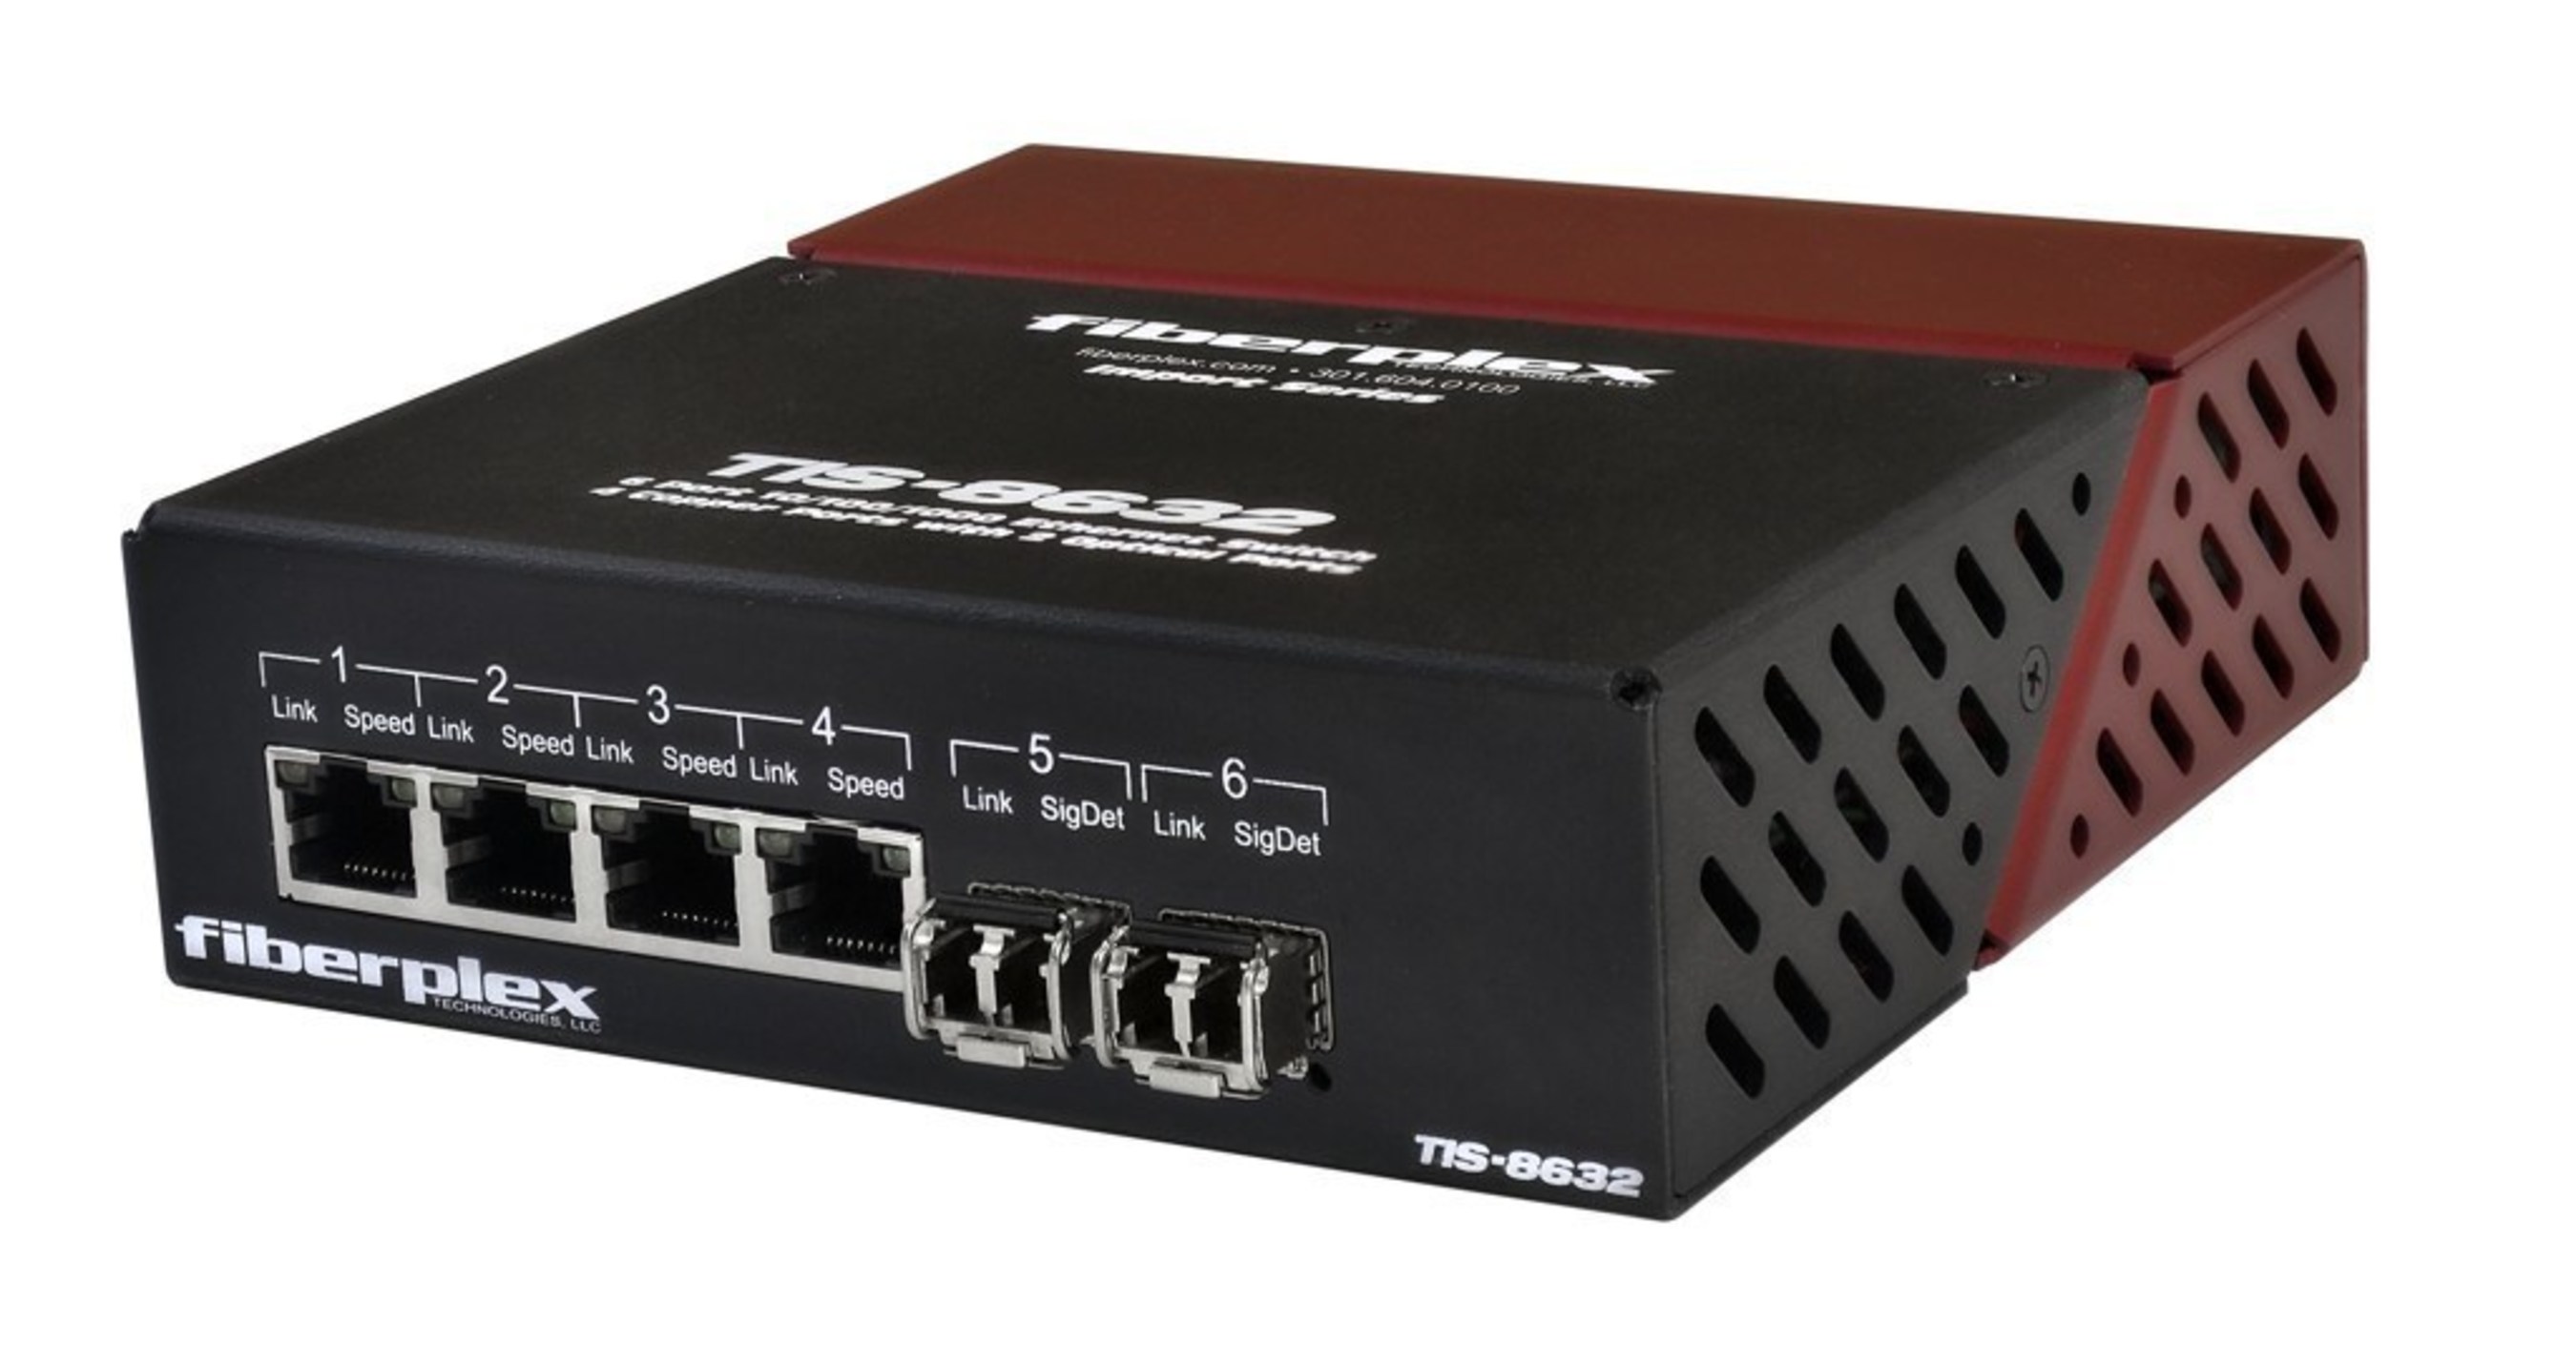 New fiber-to-Ethernet switch adds distance, noise immunity, and security to networks.